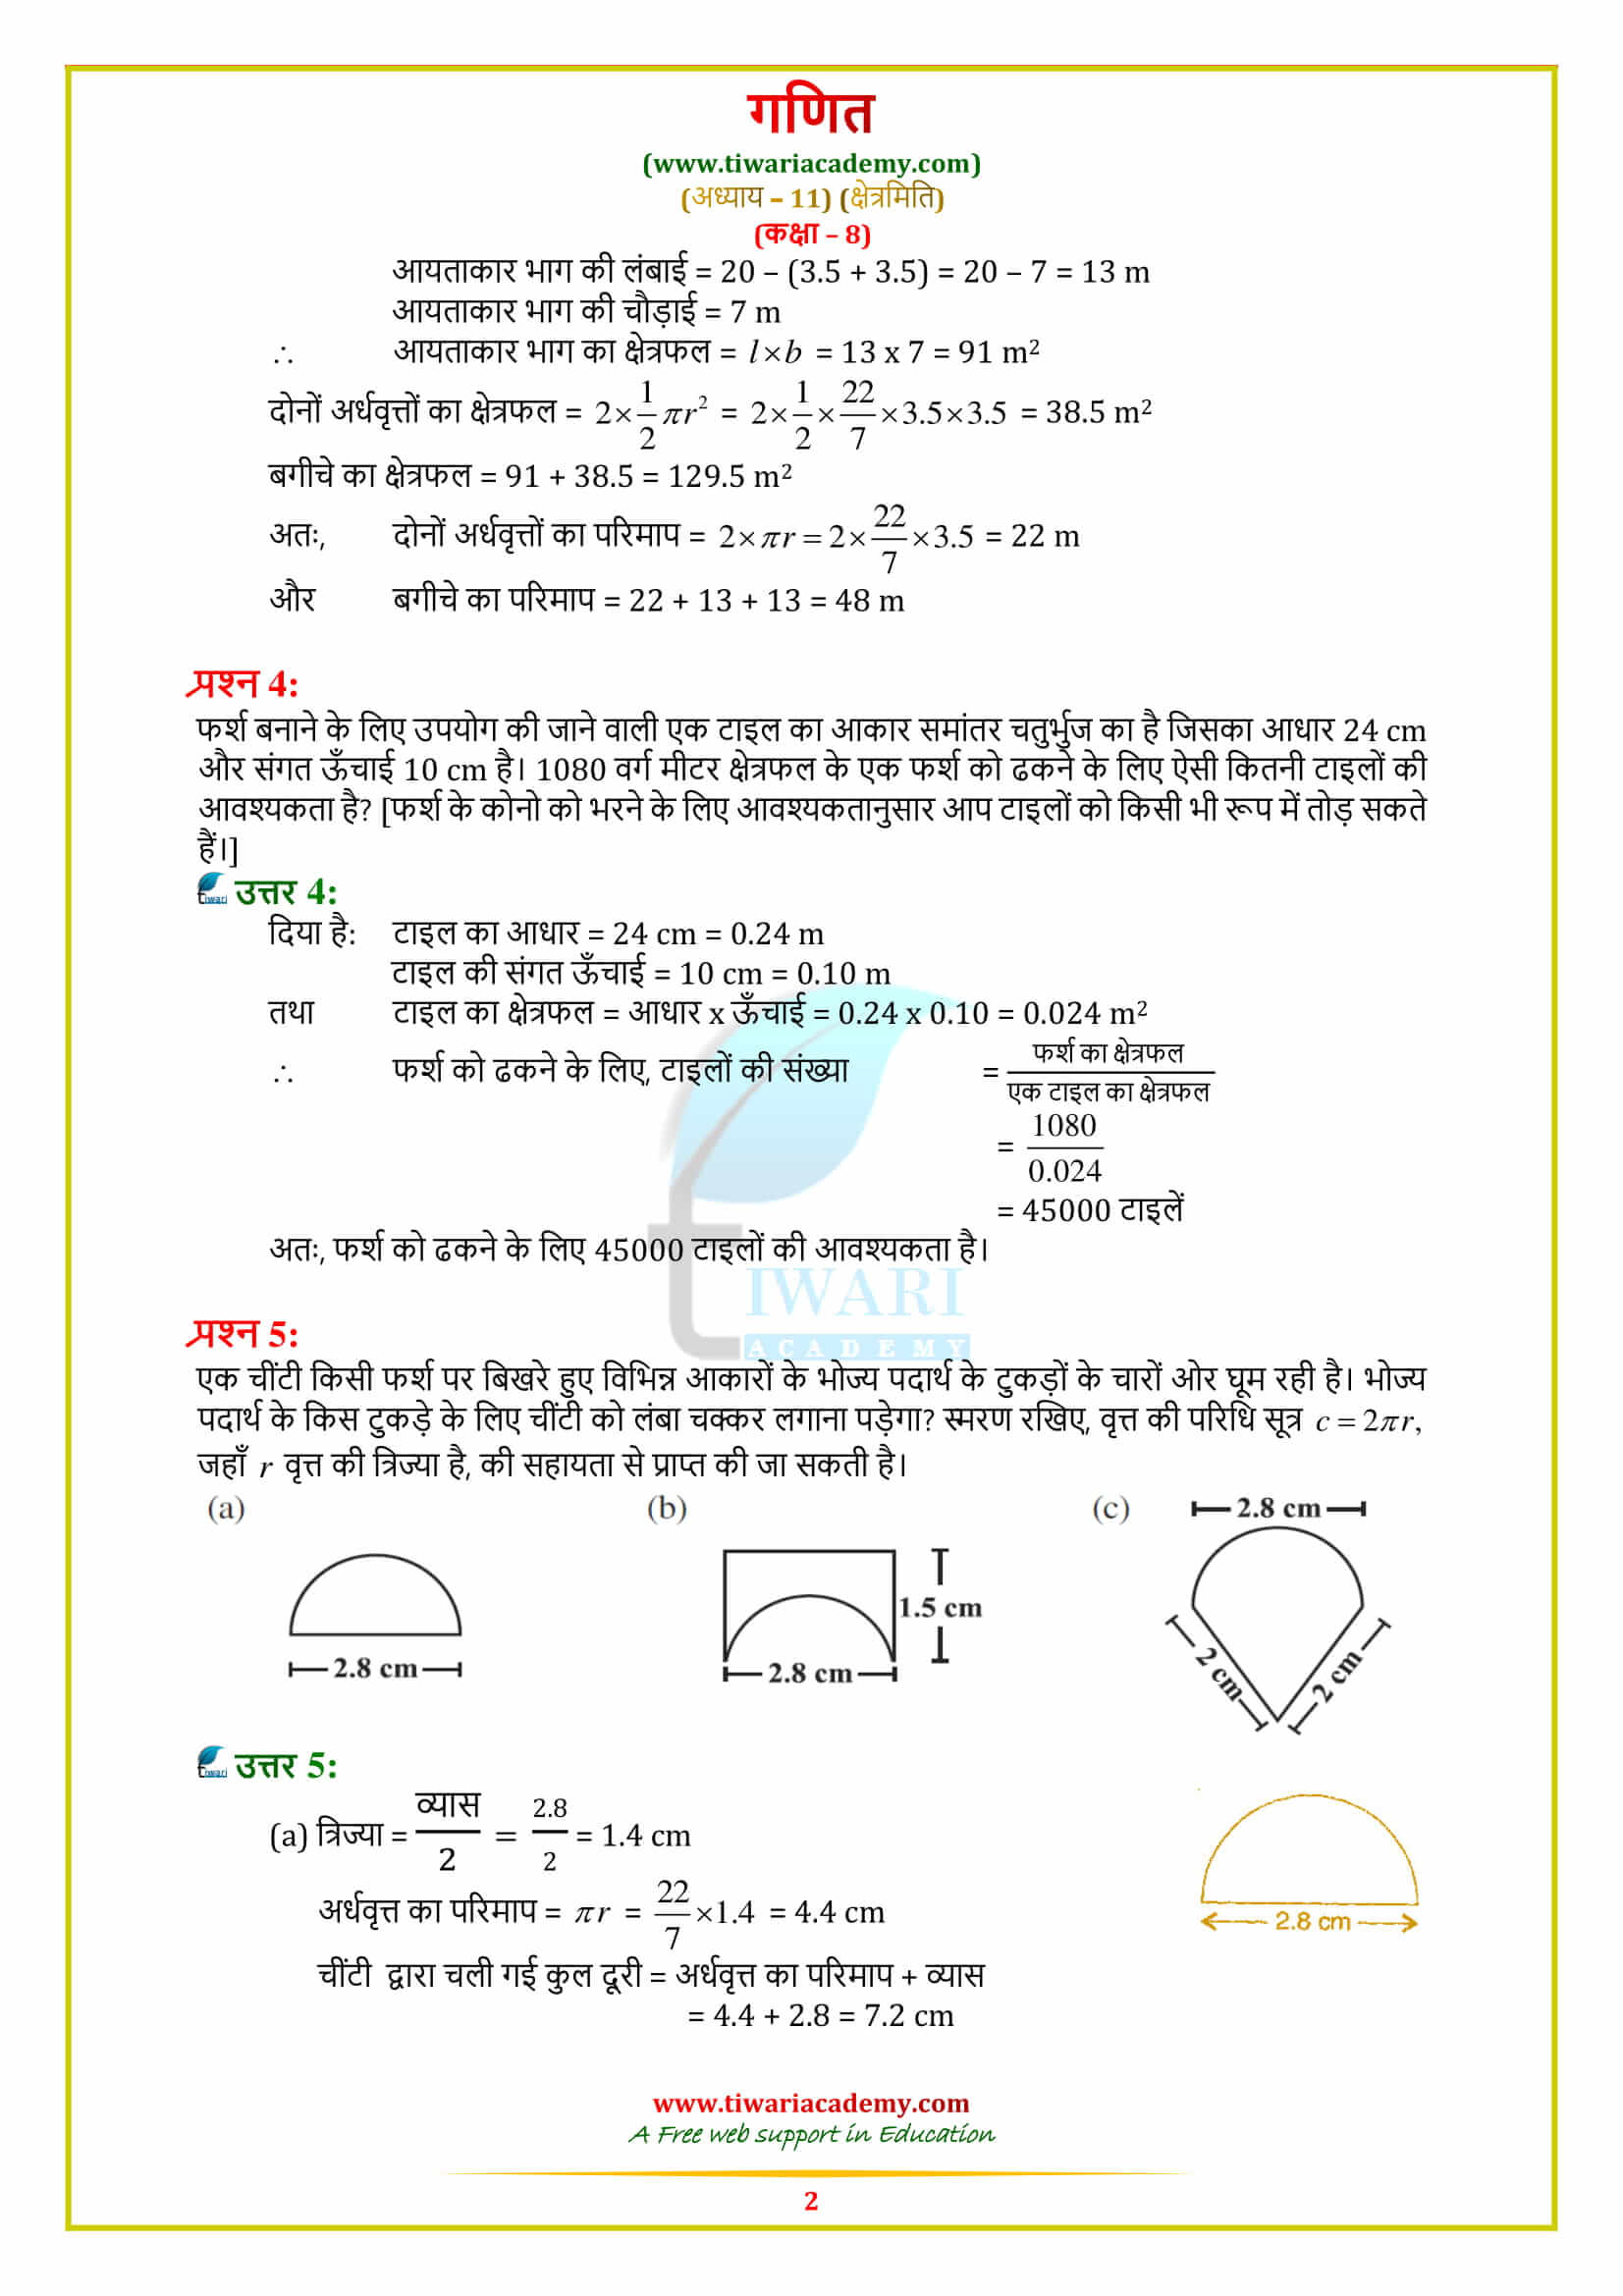 8 Maths Exercise 11.1 solutions in hindi medium free